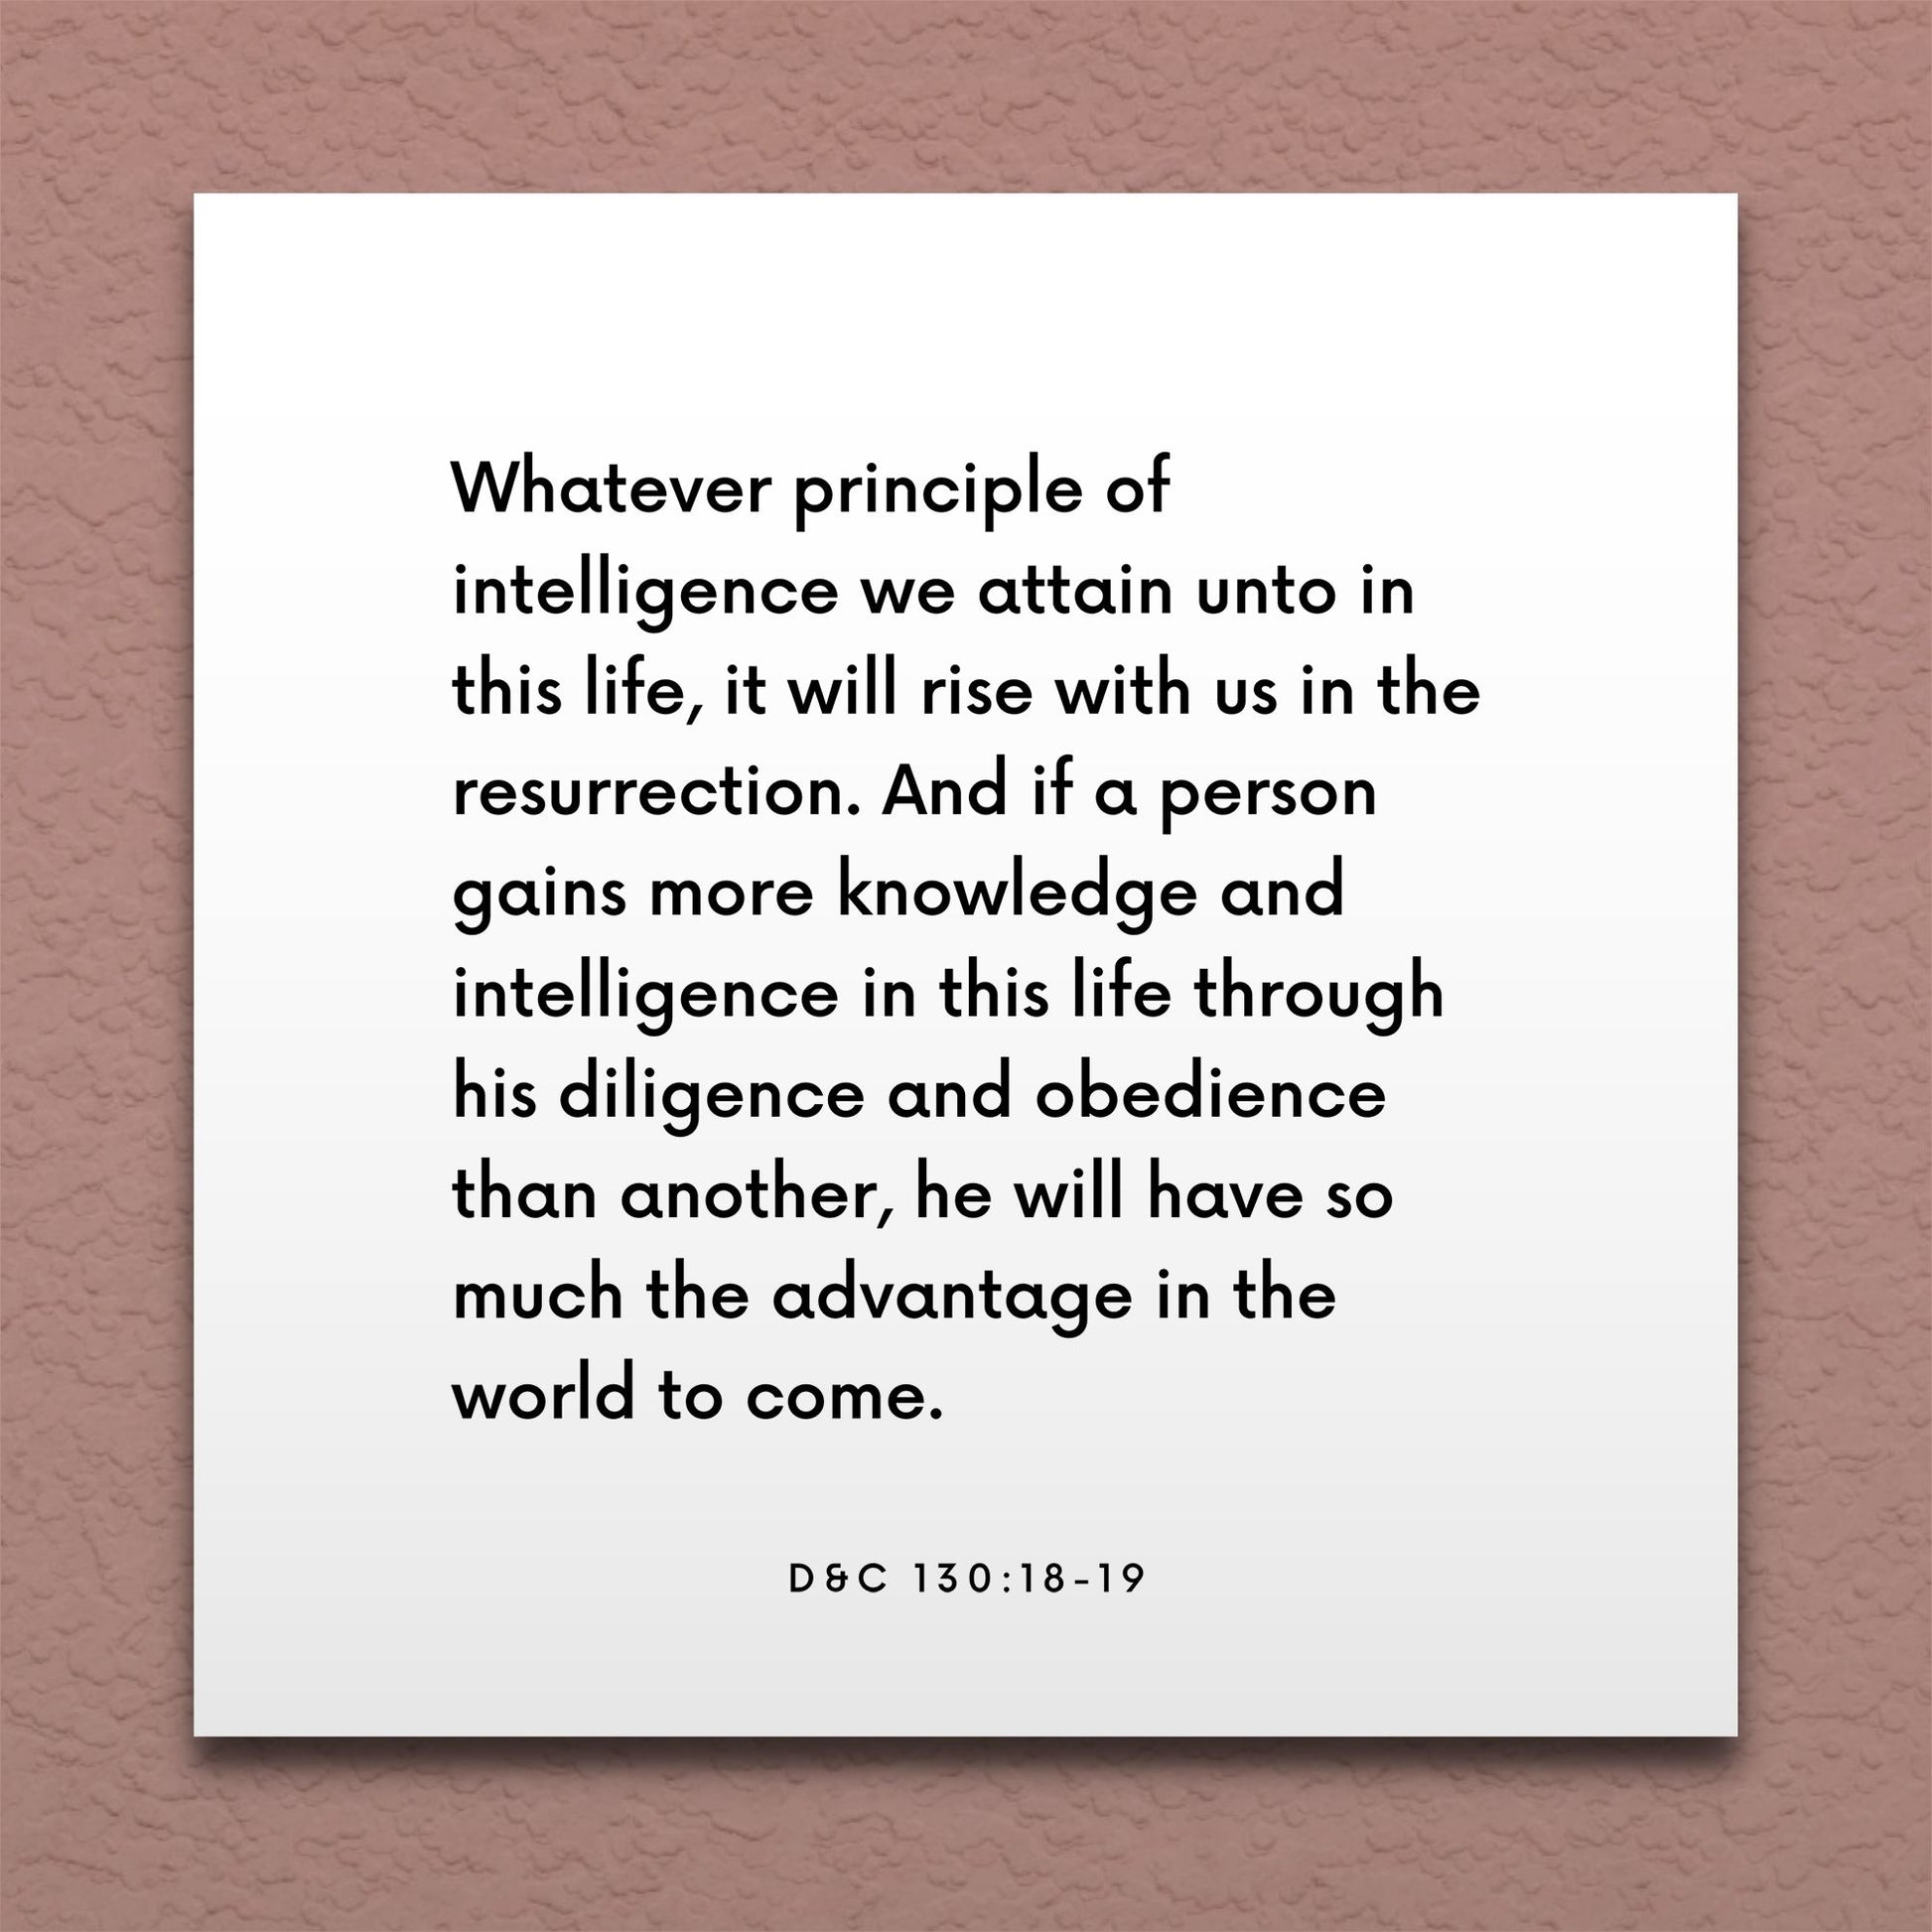 Wall-mounted scripture tile for D&C 130:18-19 - "Whatever principle of intelligence we attain in this life"